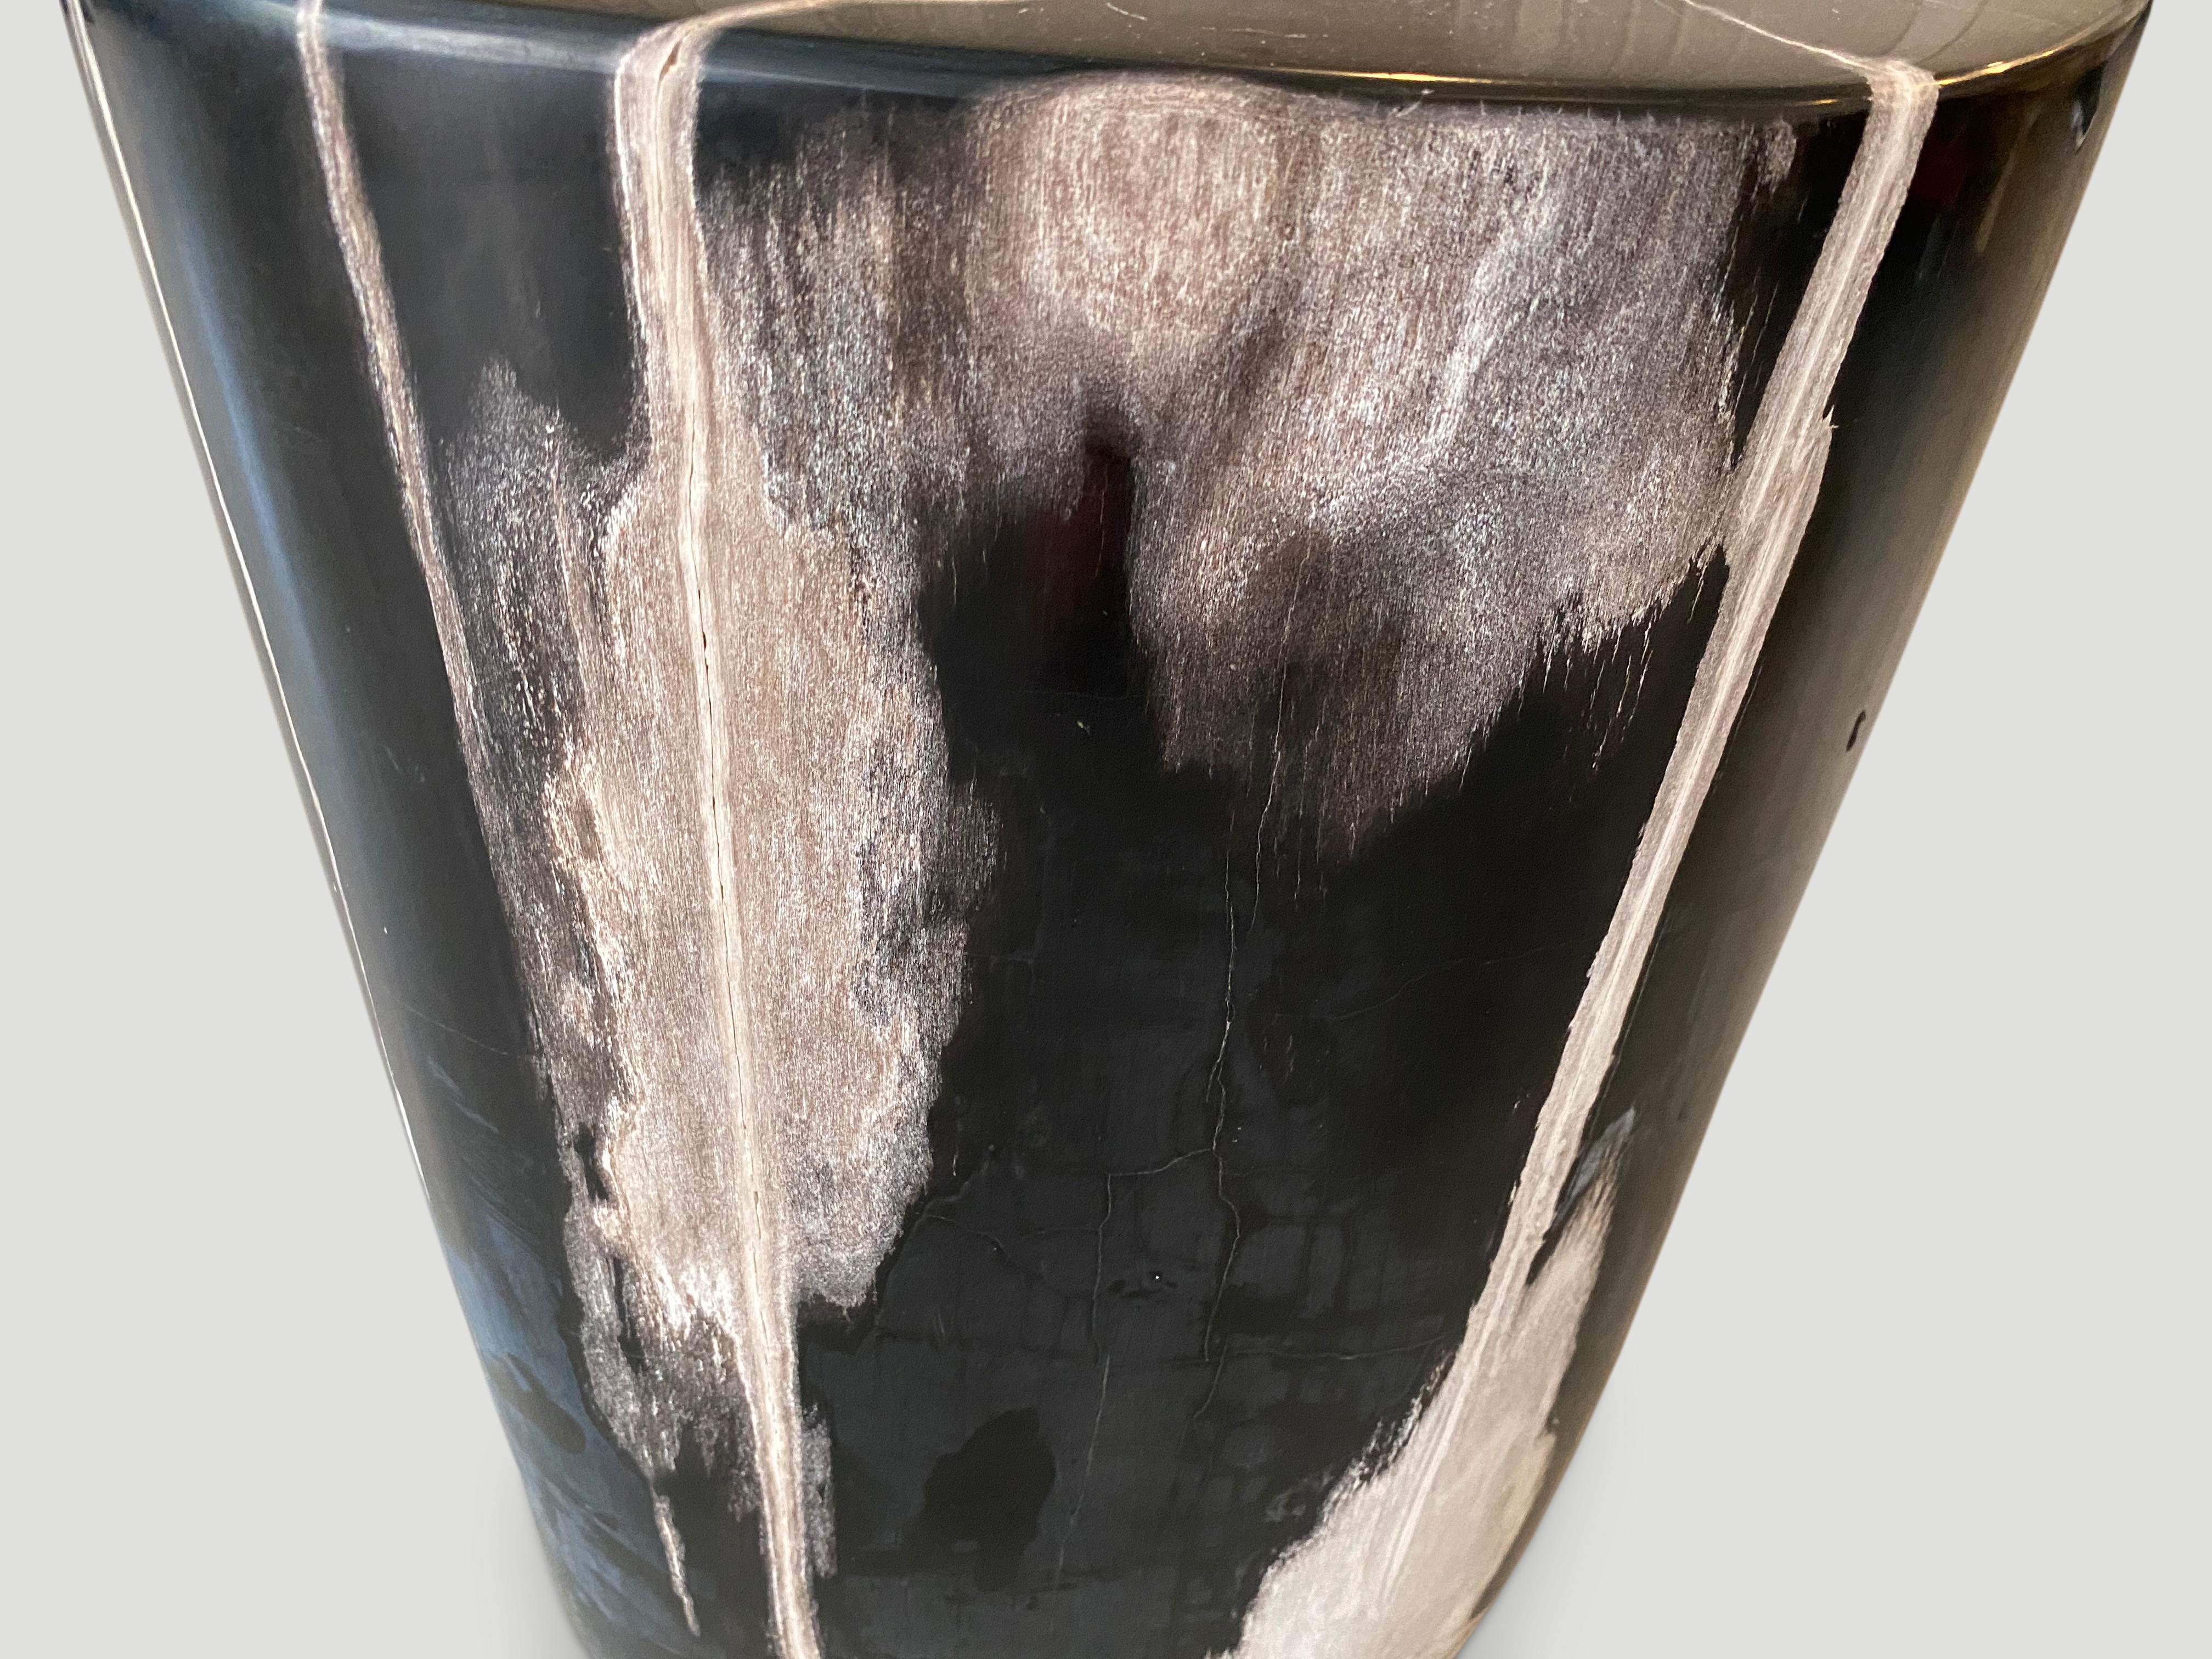 Beautiful black and white super smooth, high quality petrified wood side table. It’s fascinating how Mother Nature produces these stunning 40 million year old petrified wood teak logs with such contrasting colors with natural patterns throughout.